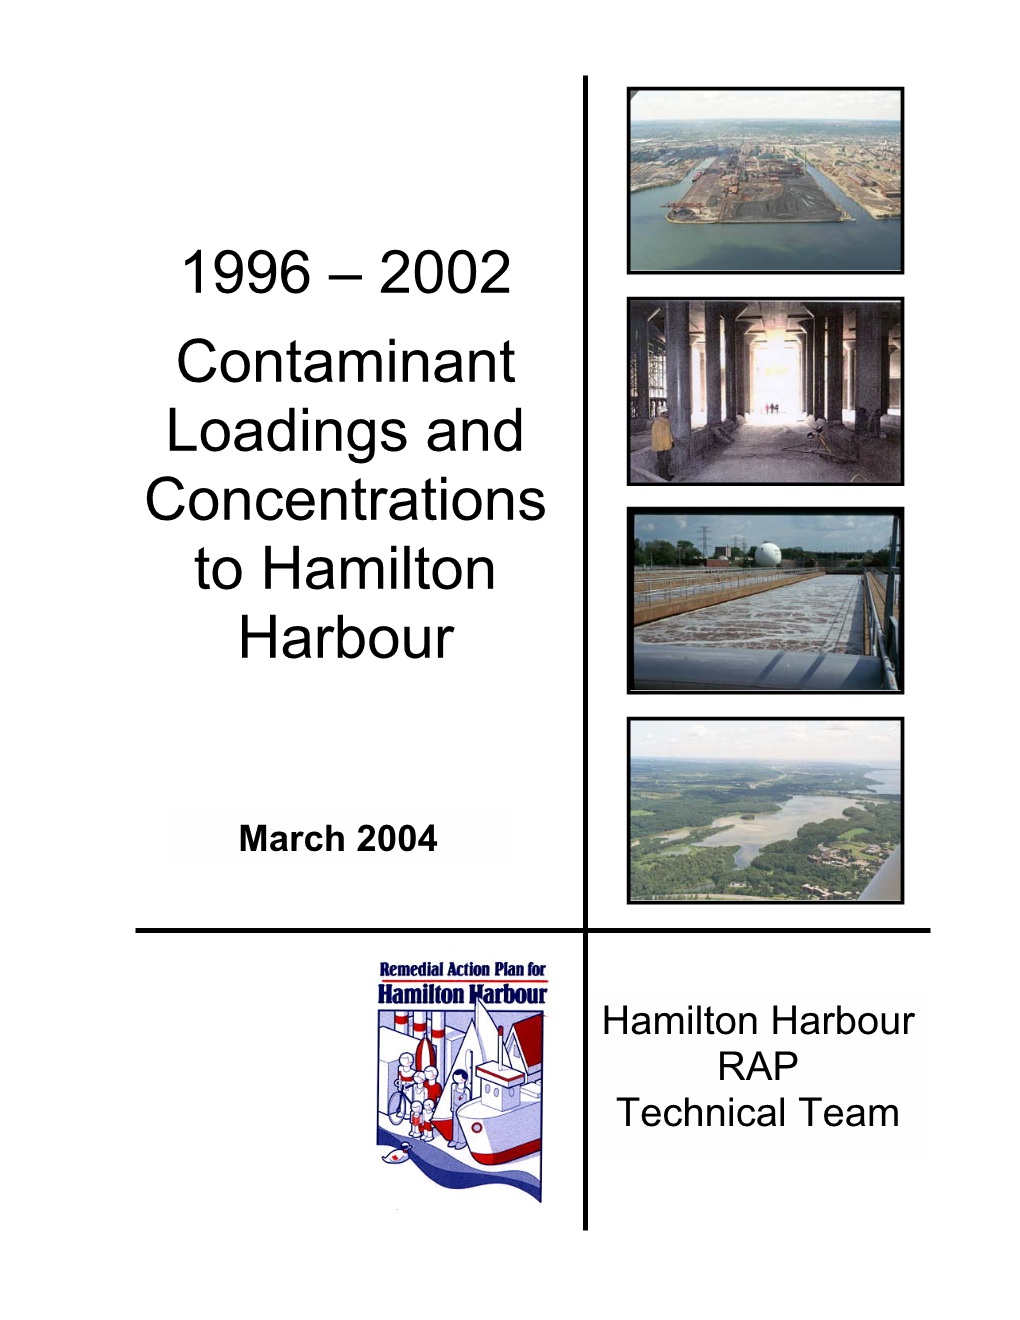 2002 Contaminant Loadings and Concentrations to Hamilton Harbour